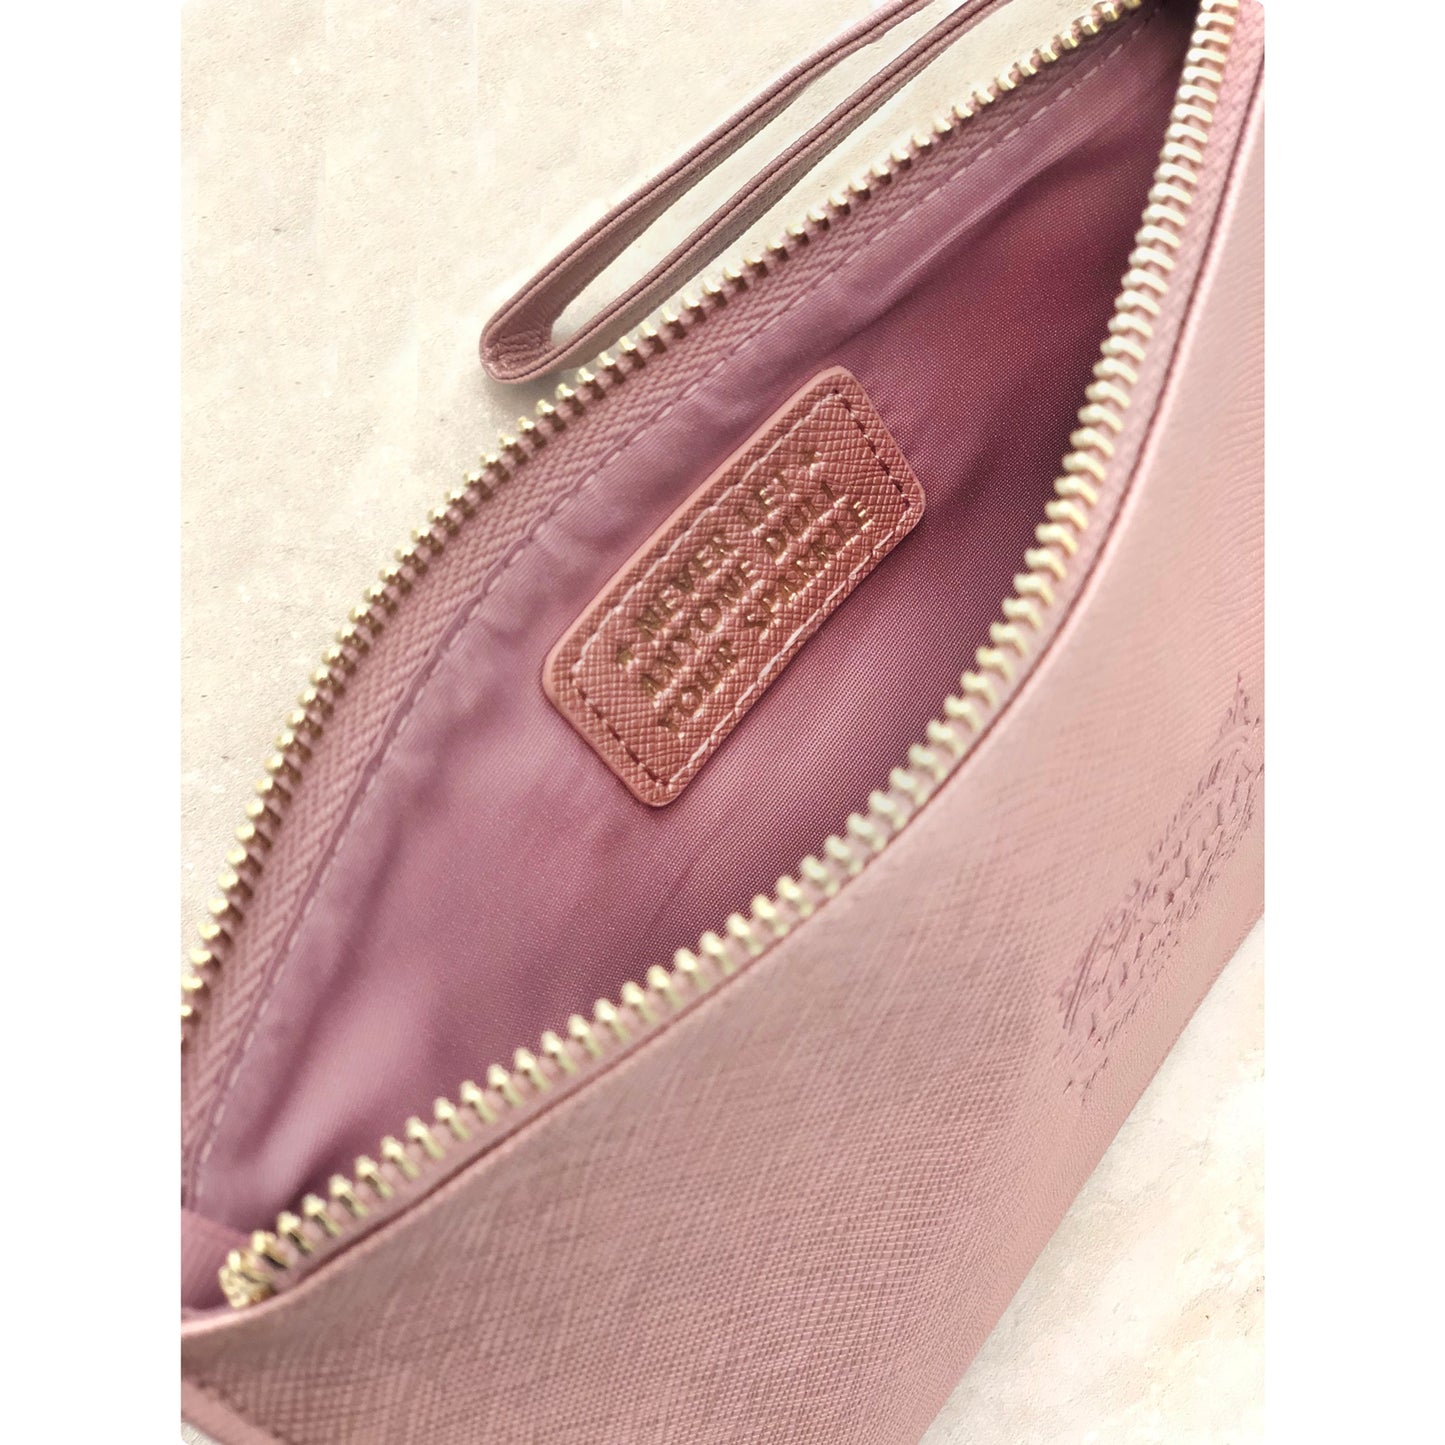 Clutch Bag With Handle & Embossed Text "Laura"